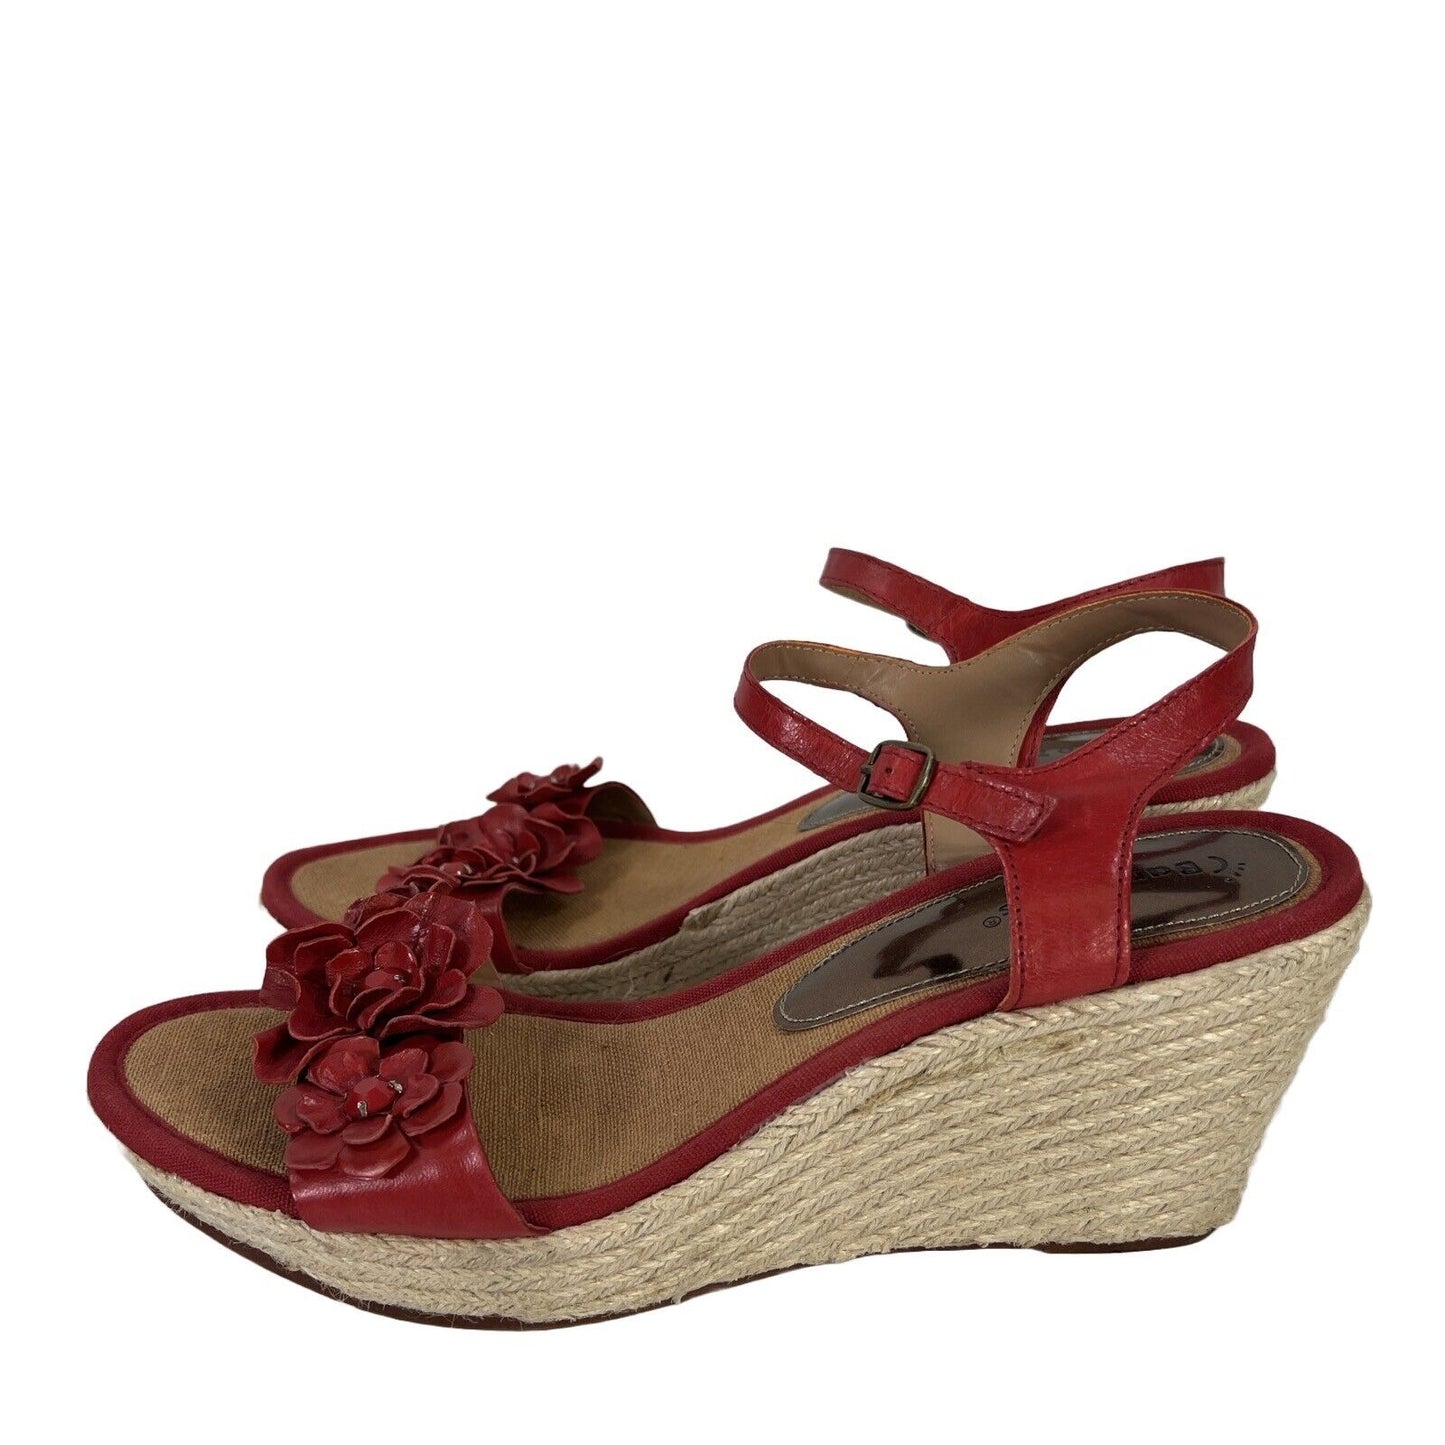 Baretraps Women's Red Leather Rope Wrapped Wedge Sandals - 11 M